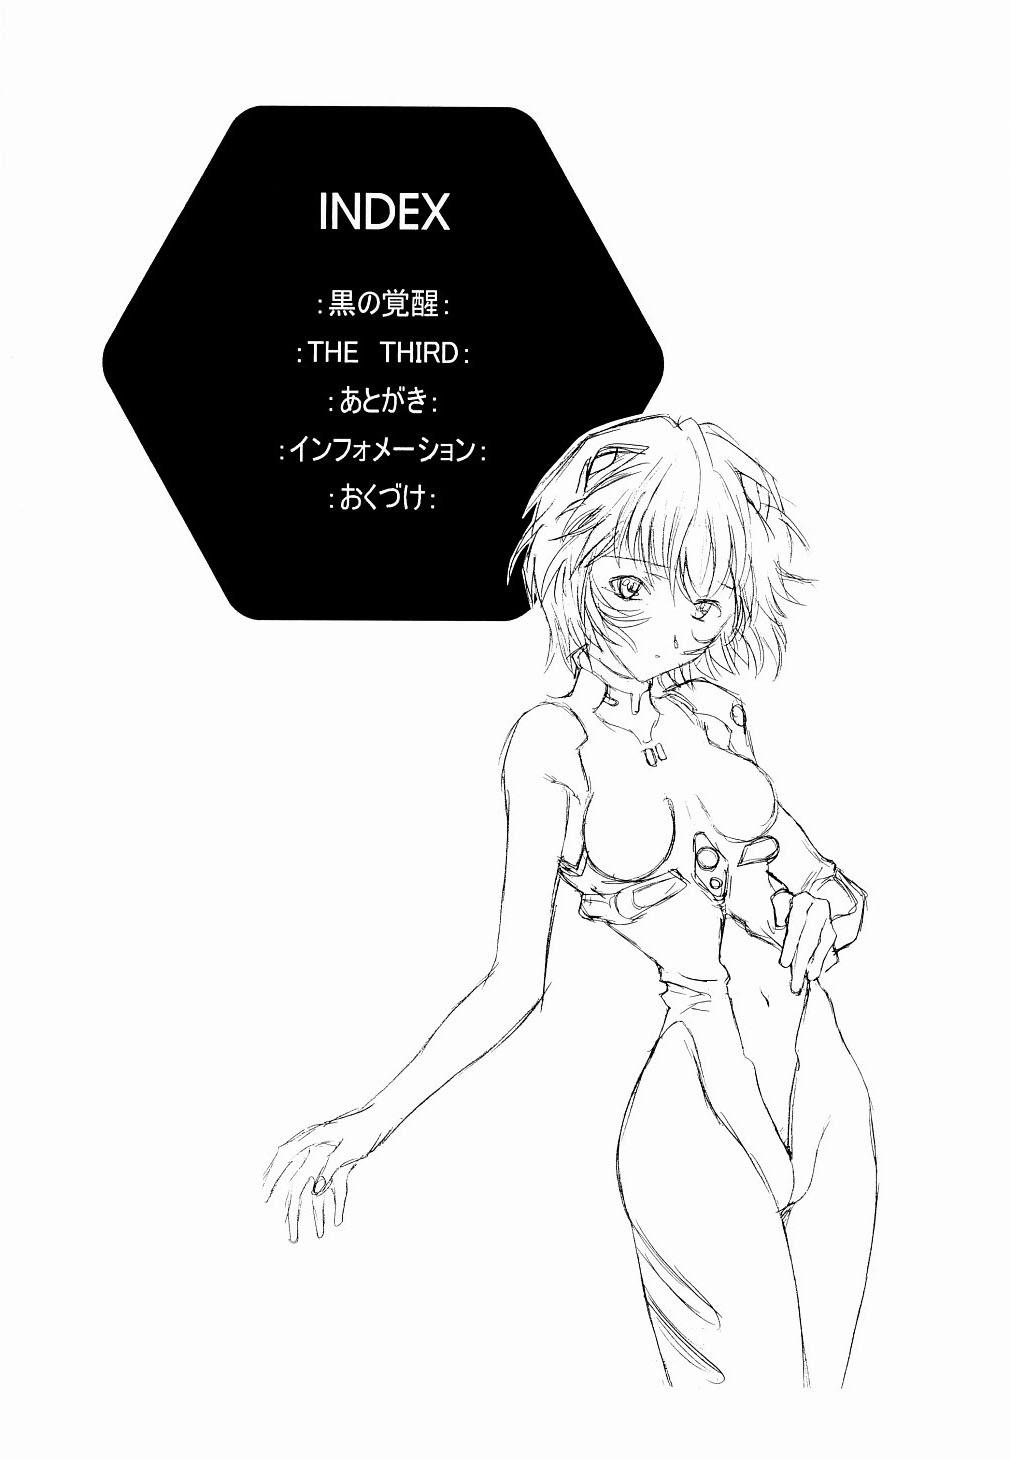 Butts Ayanami Club 2 - Neon genesis evangelion Home - Page 3